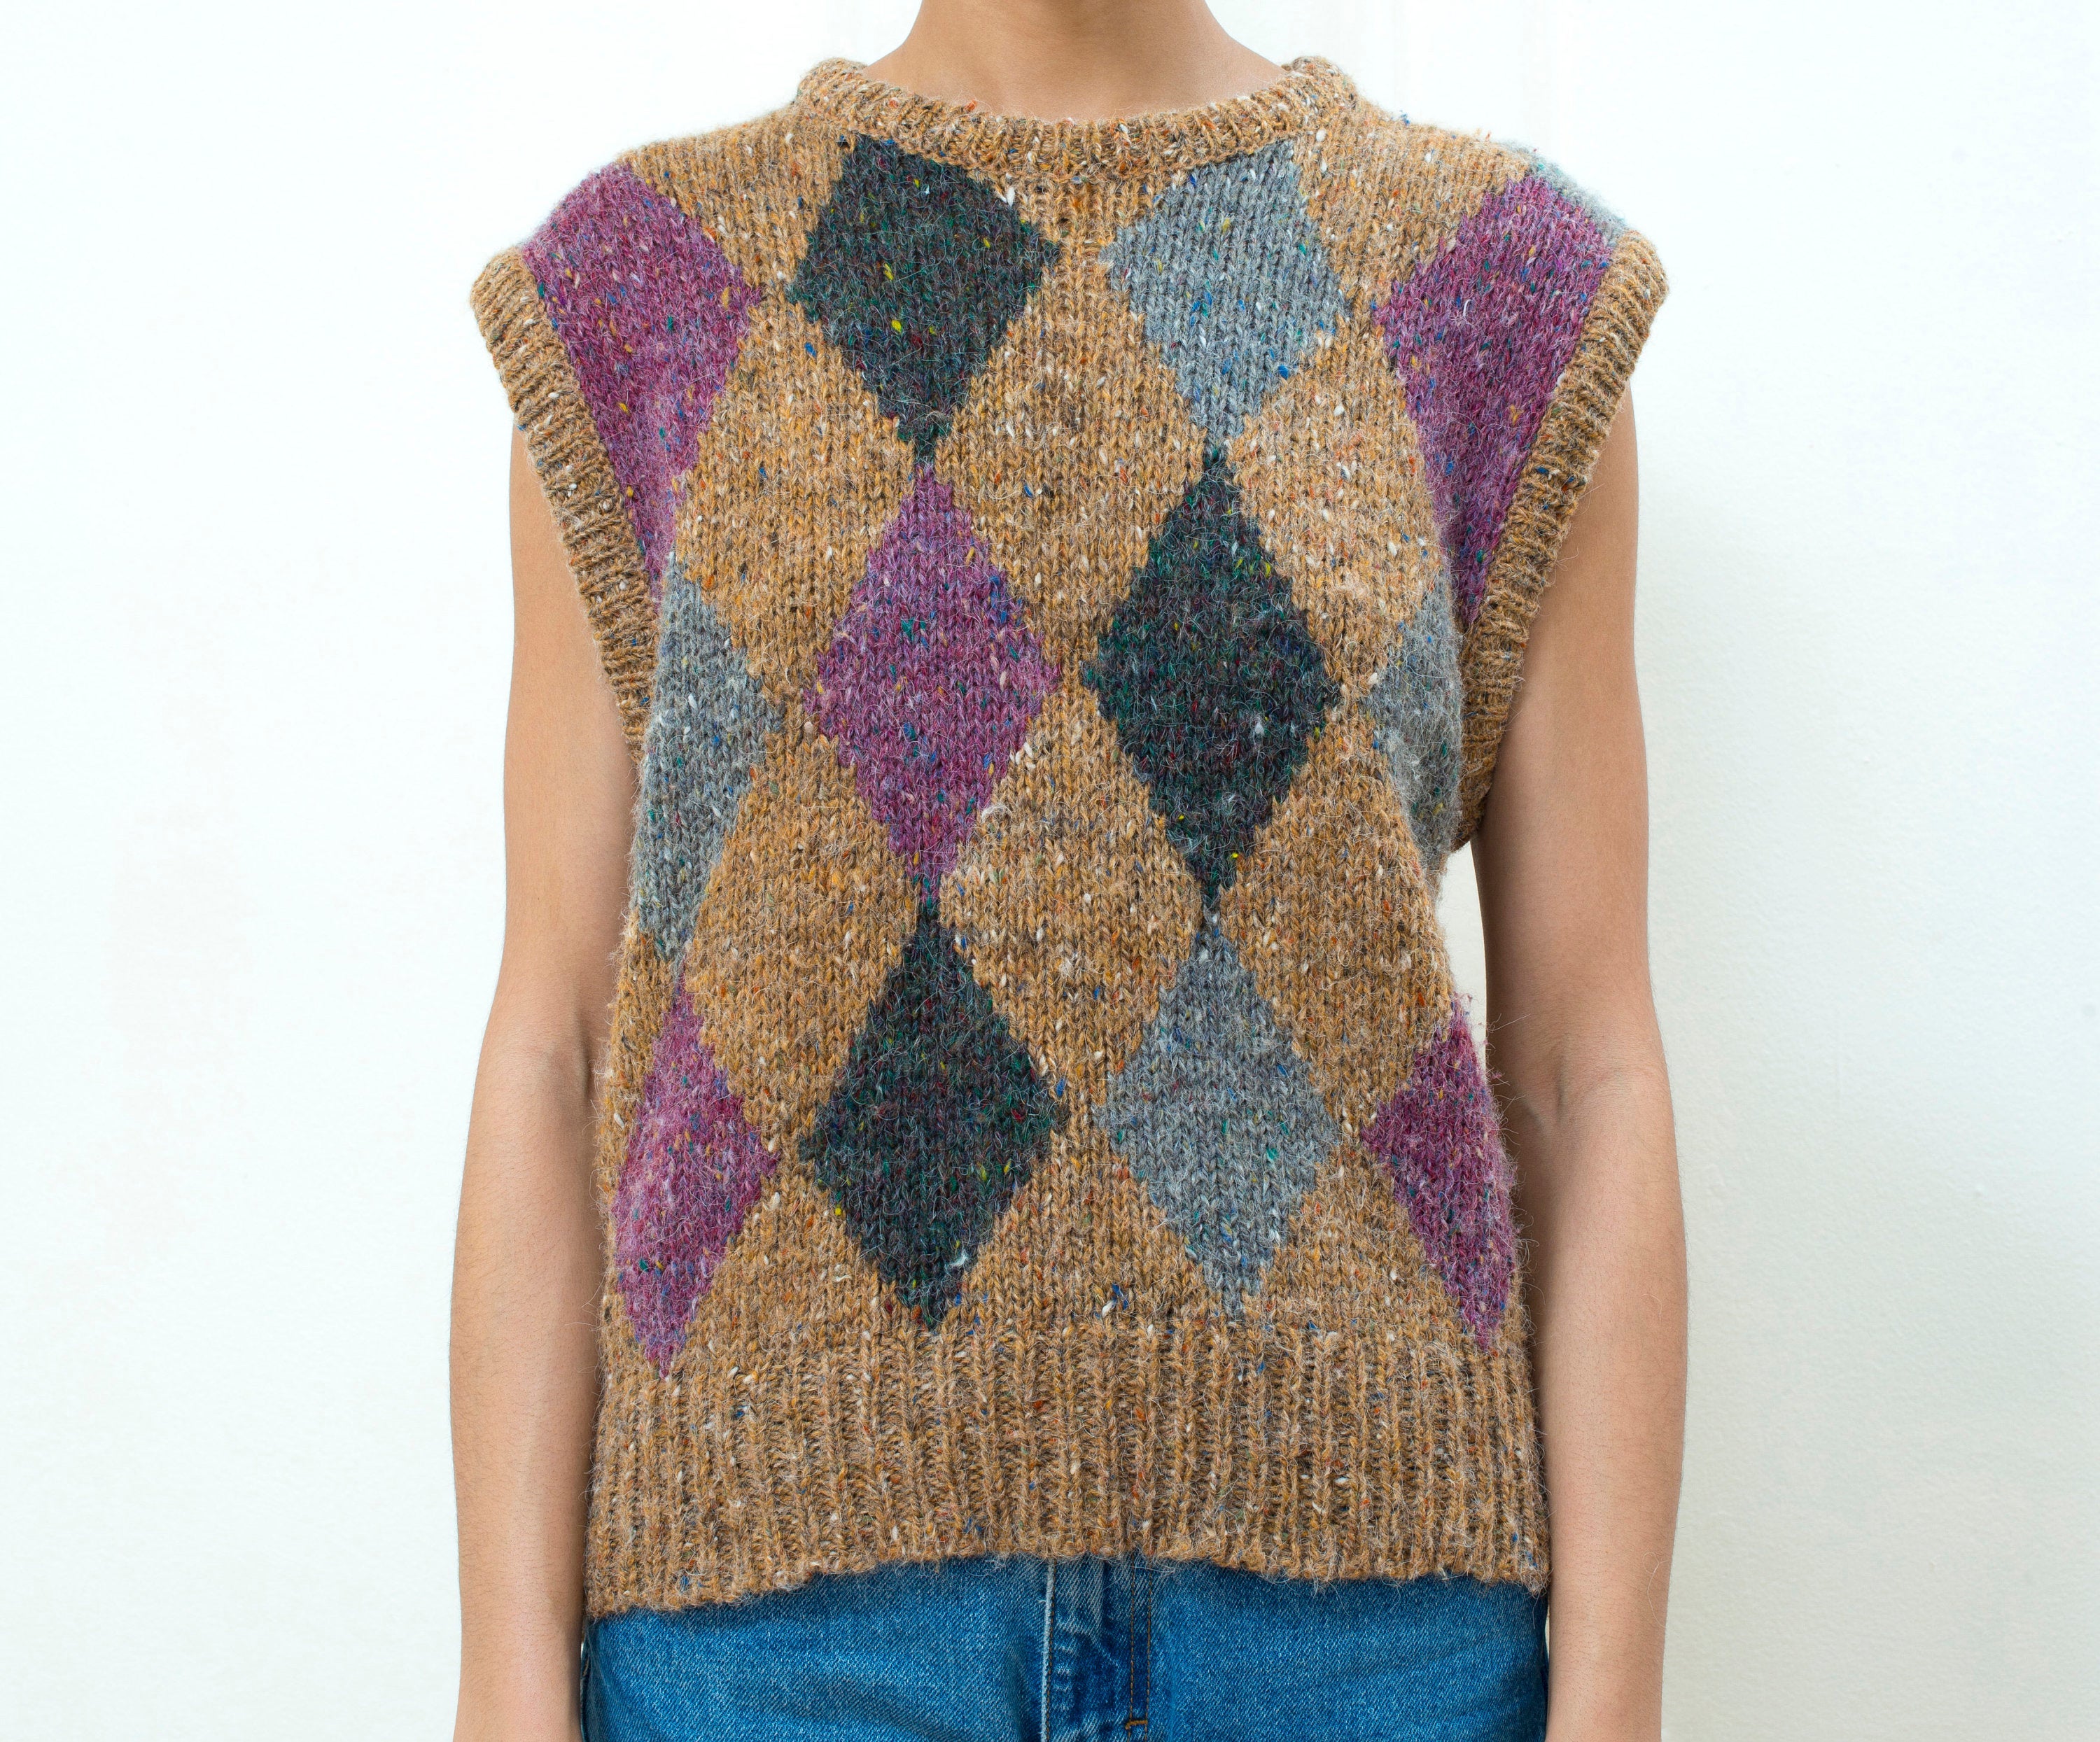 Vintage Brown , Gold and White Jumper For Sale at 1stDibs